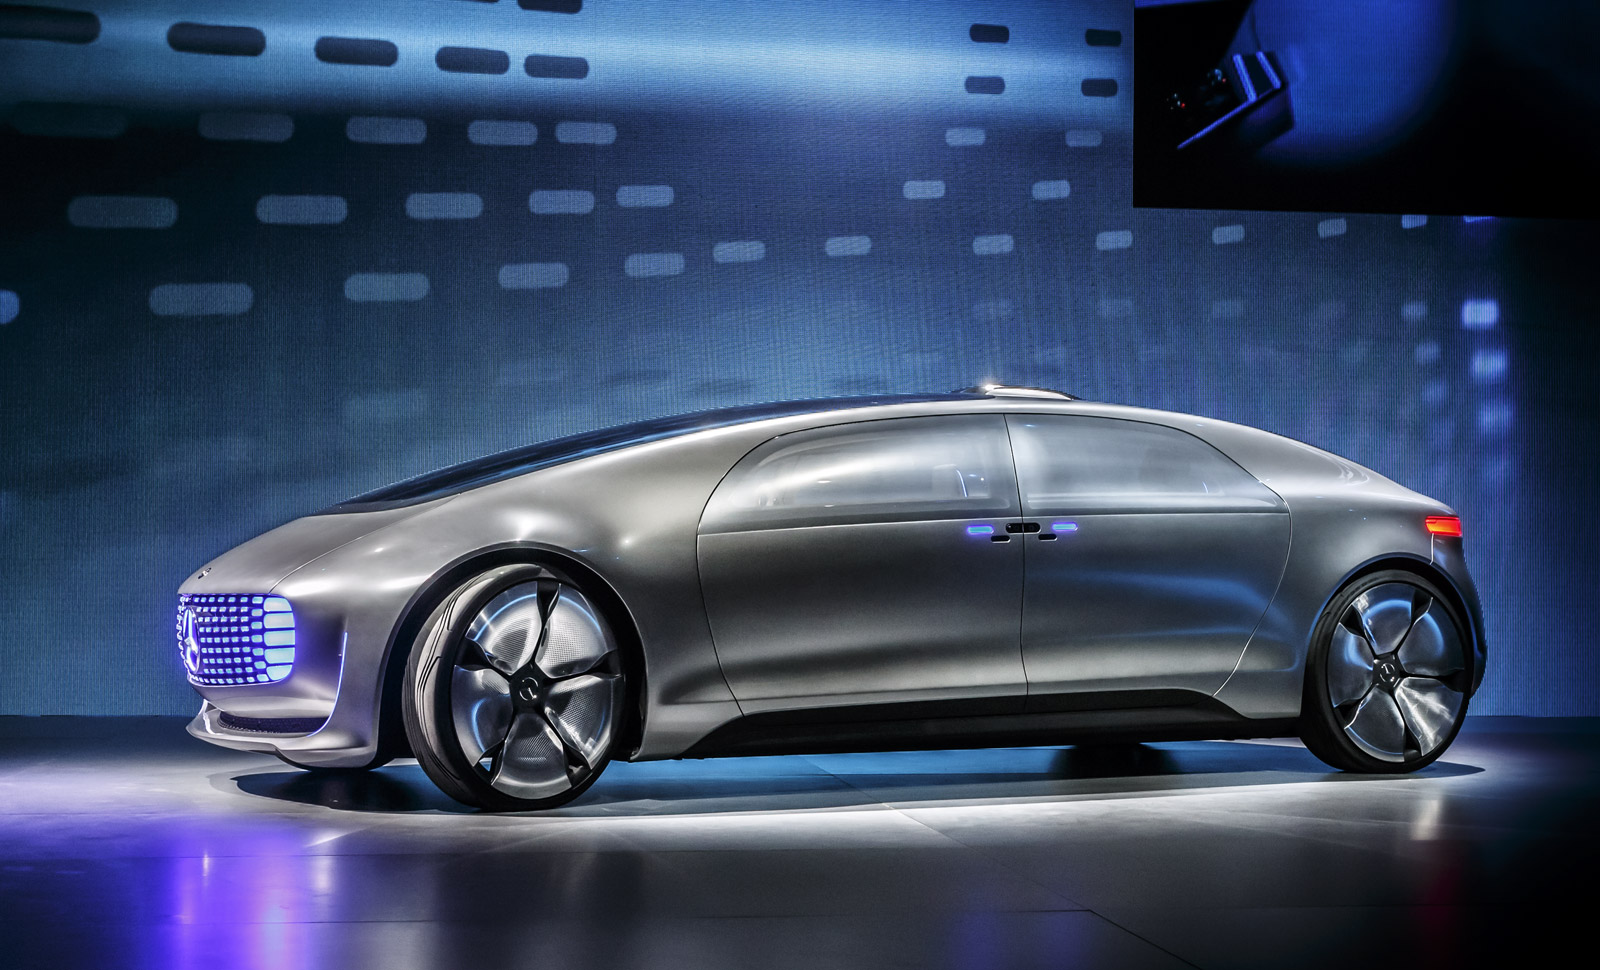 The Future Arrives Early With Mercedes Benz F015 Self Driving Car Concept